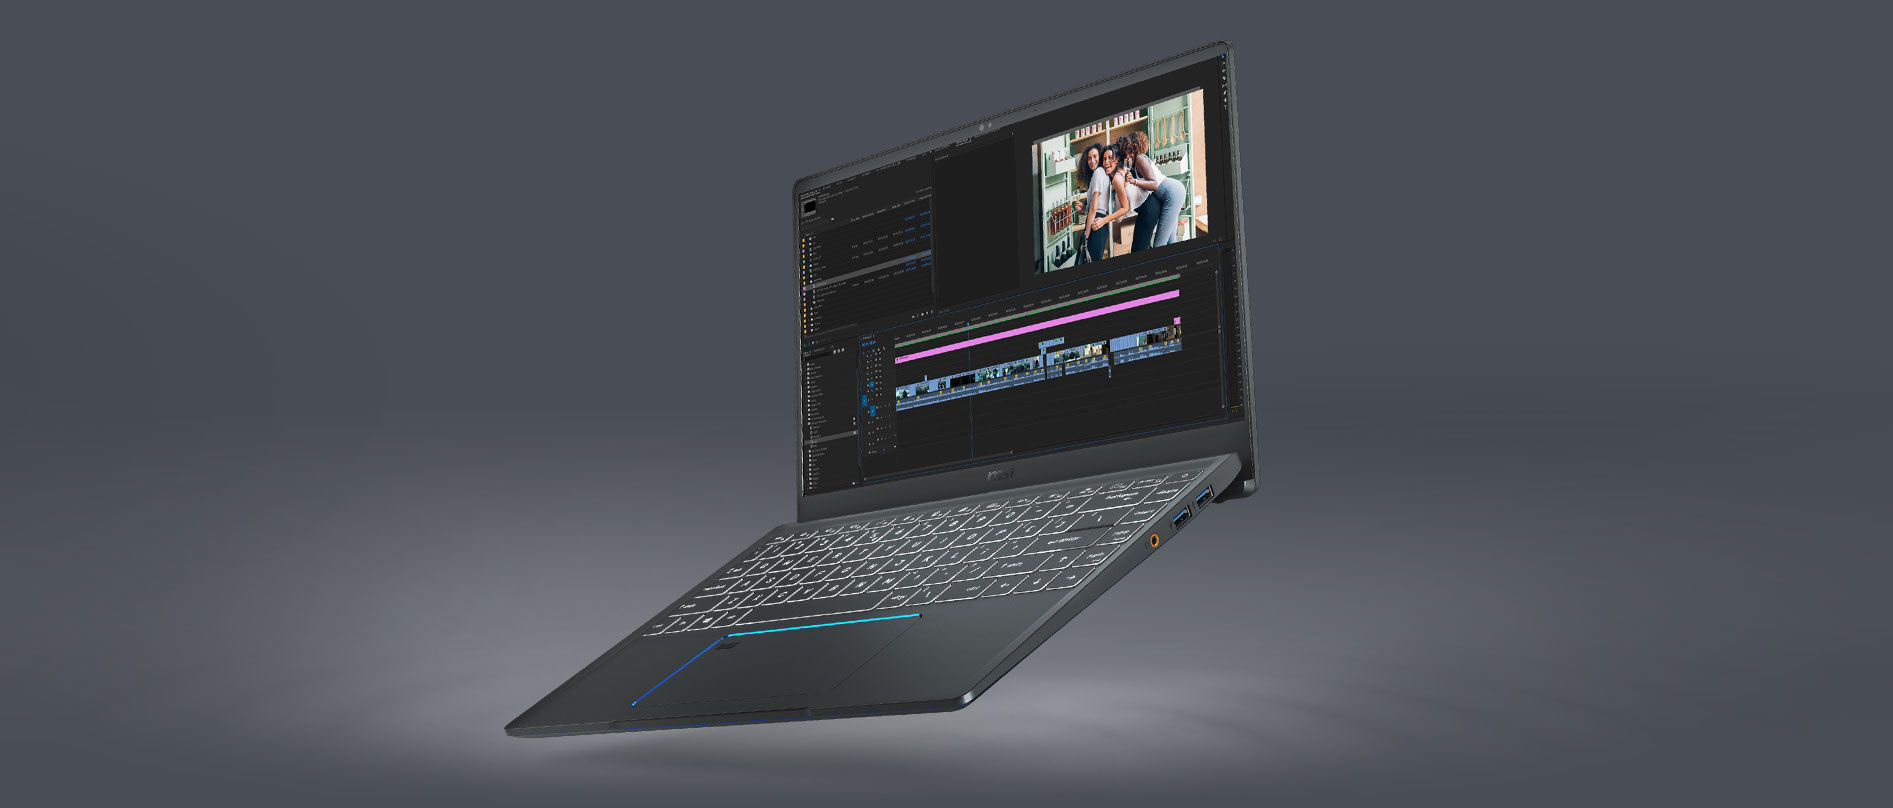 Prestige 15 Opens Widely and Angled to Left A Little with Video Editing on Its Screen